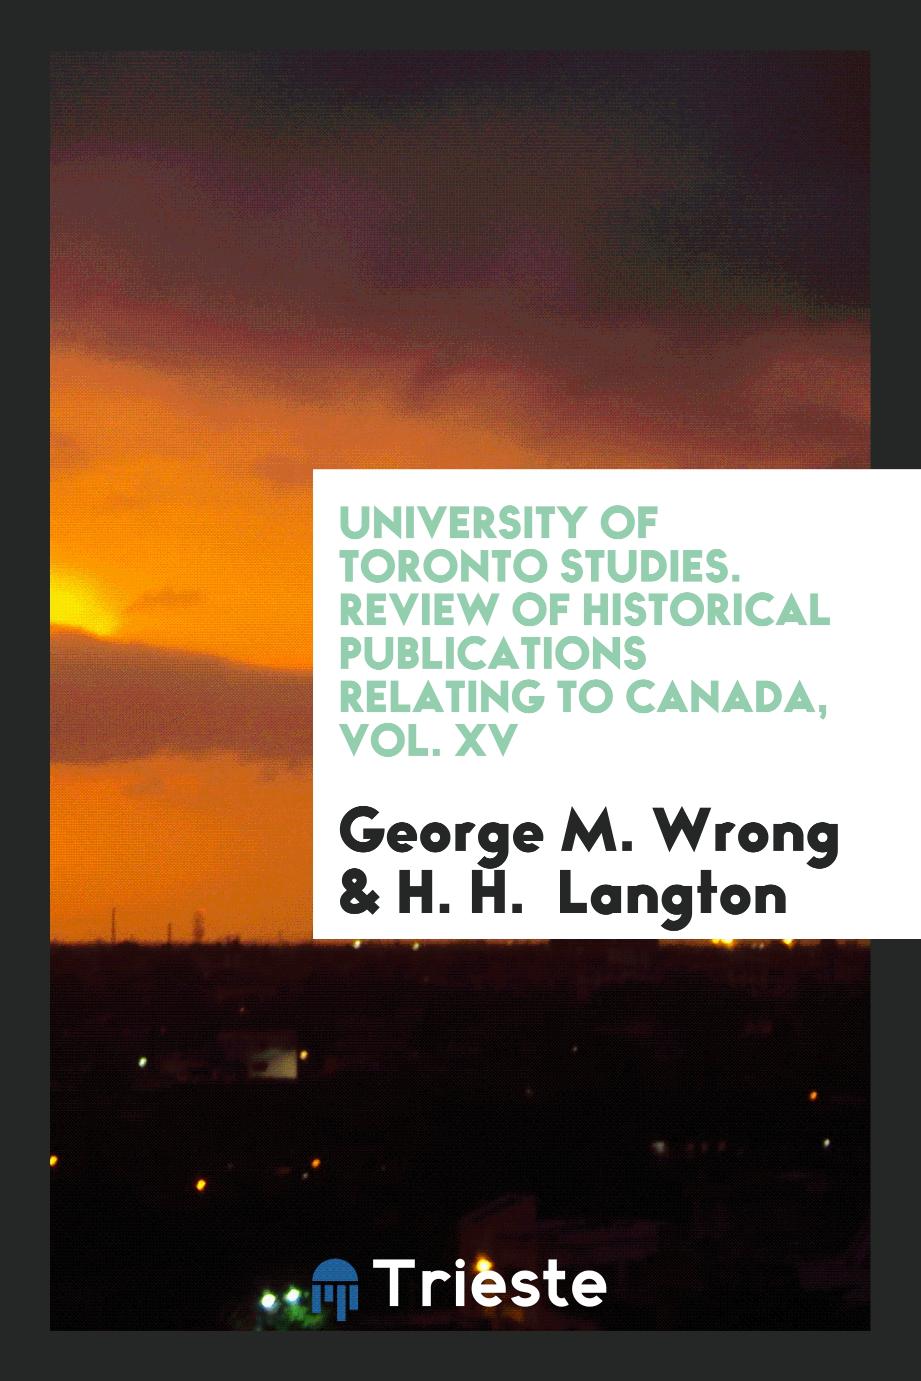 University of Toronto studies. Review of historical publications relating to Canada, Vol. XV